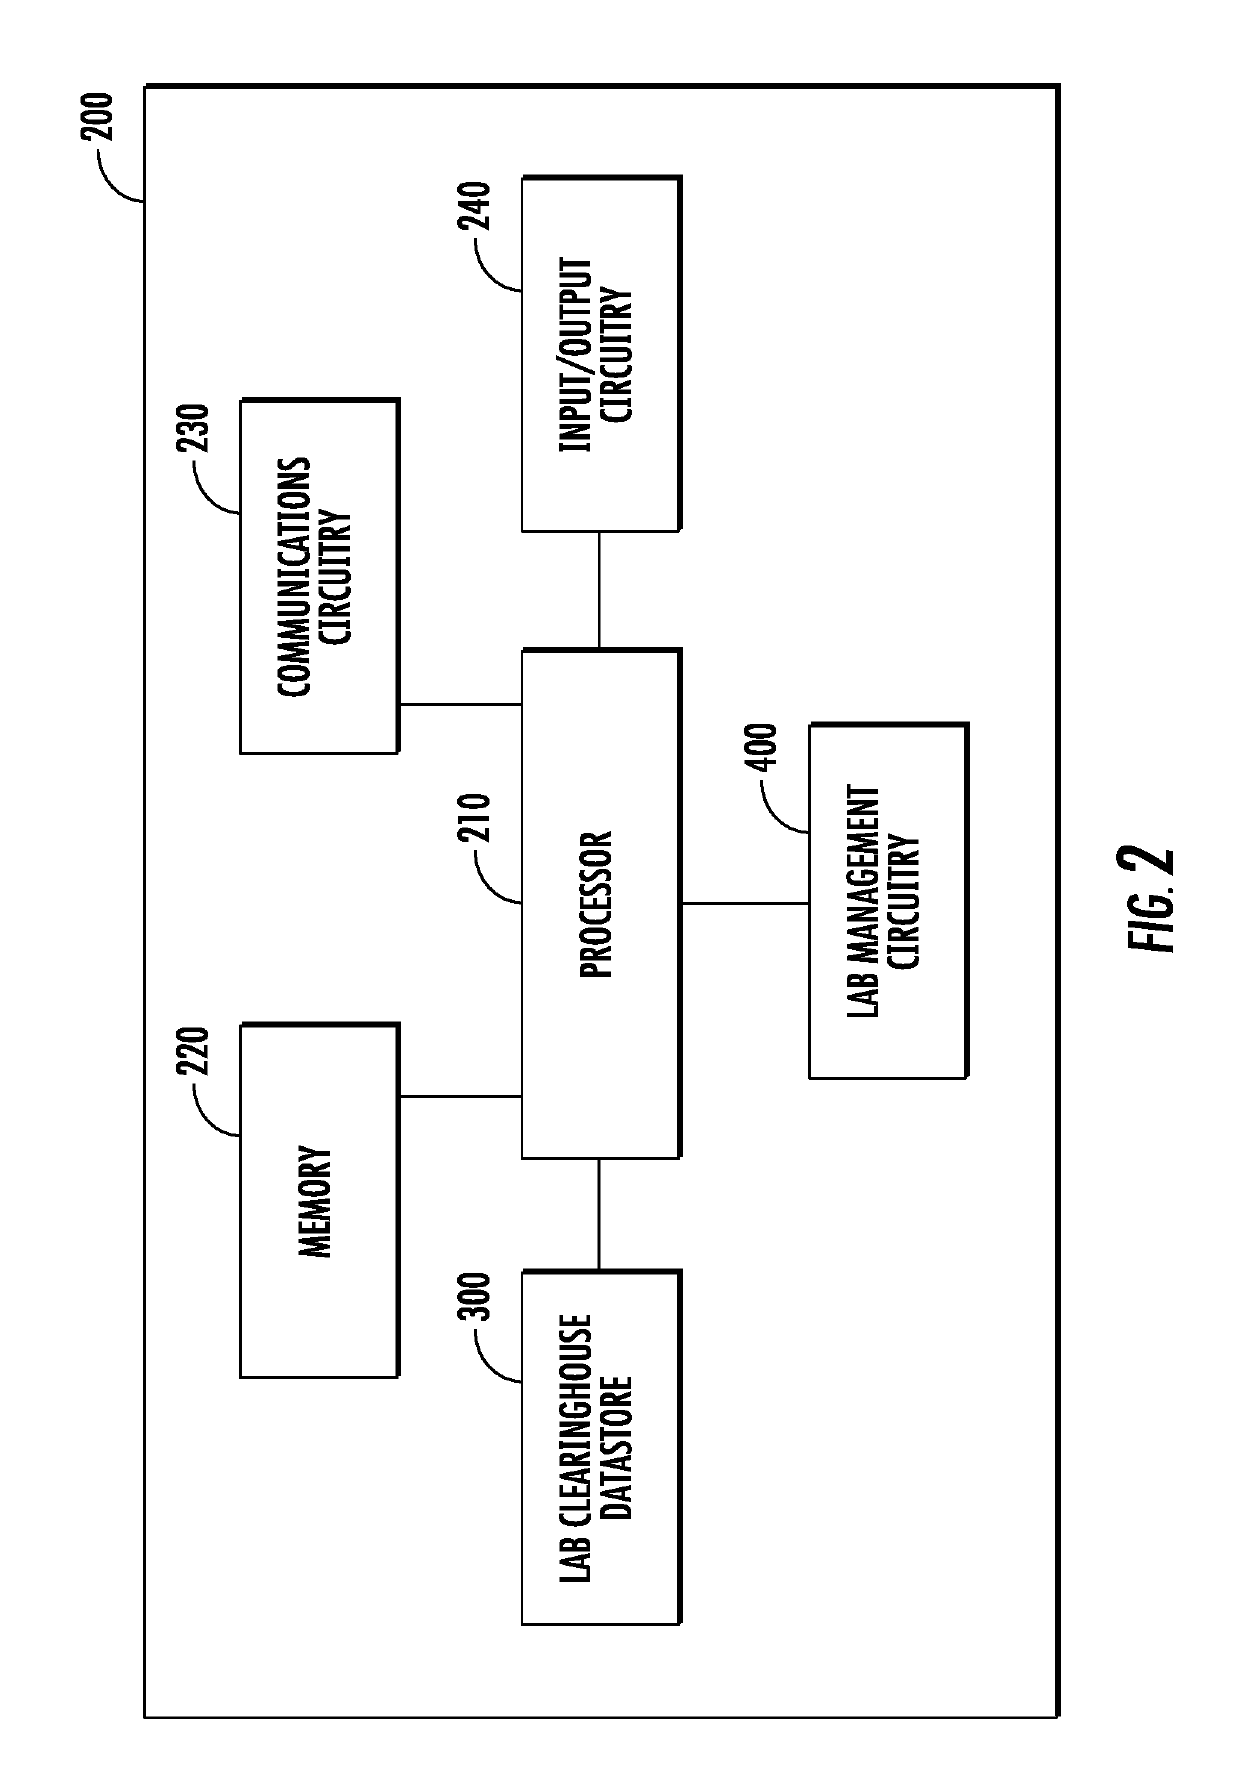 Device for approving medical tests across a plurality of medical laboratories, medical providers, and lab payers and methods for using the same